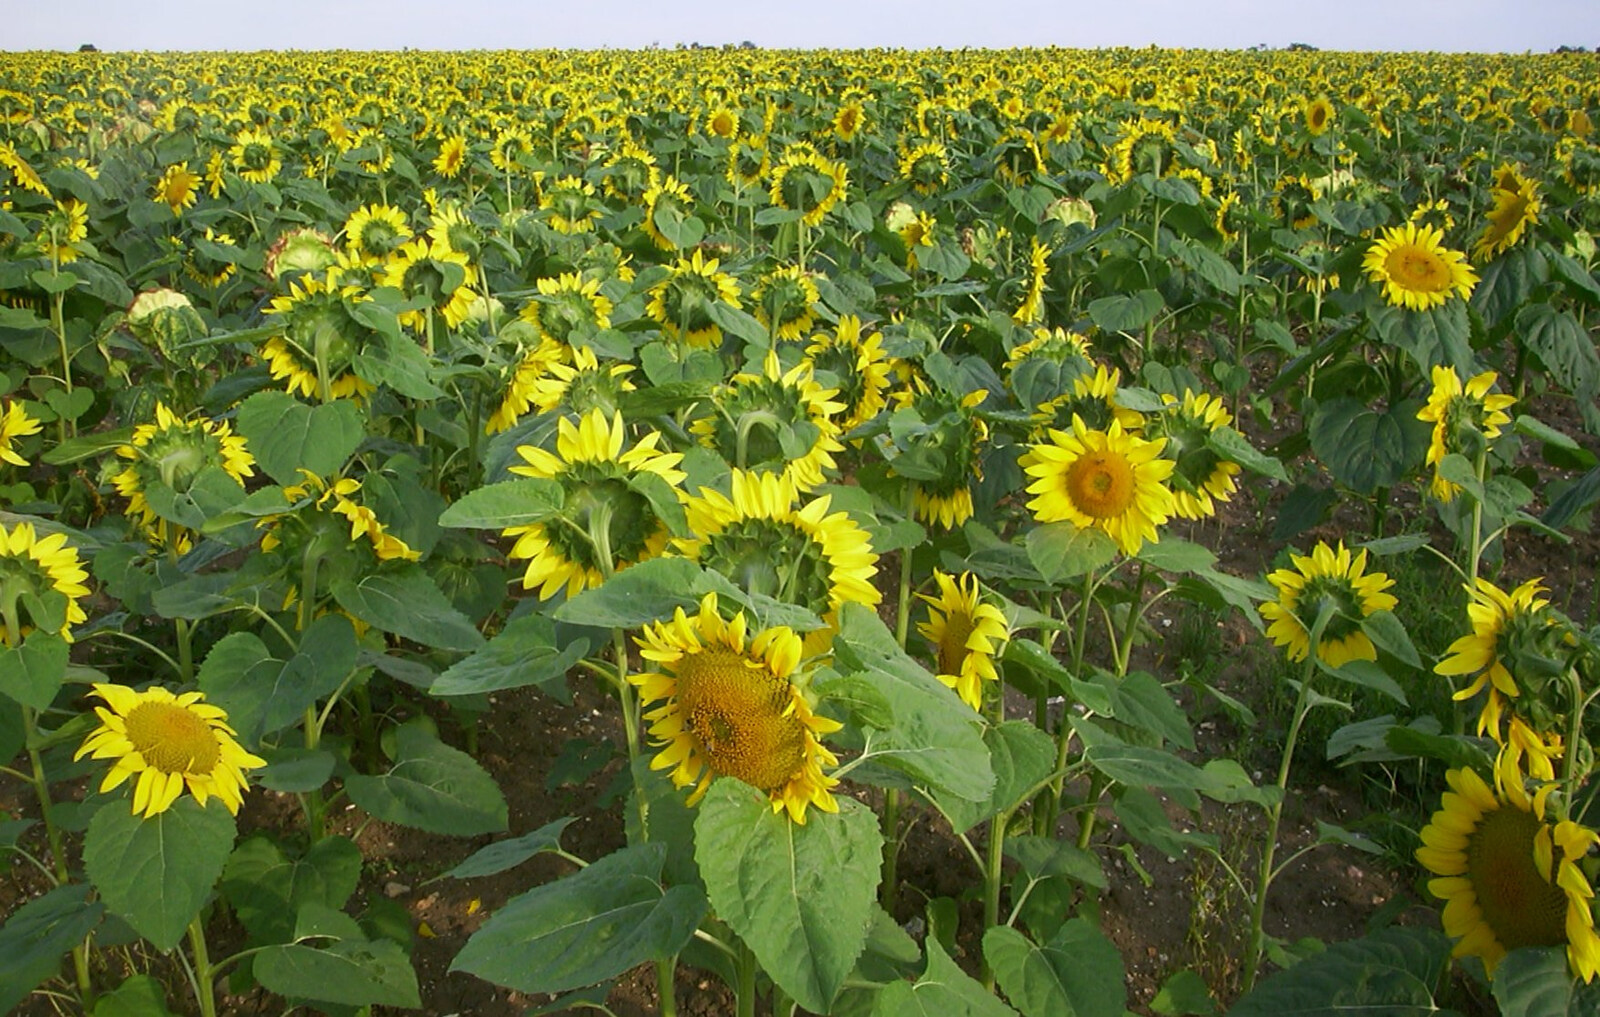 A field on sunflowers off the Yaxley straight from Alan gets a Cherry Picker, Brome, Suffolk - 2nd August 2002